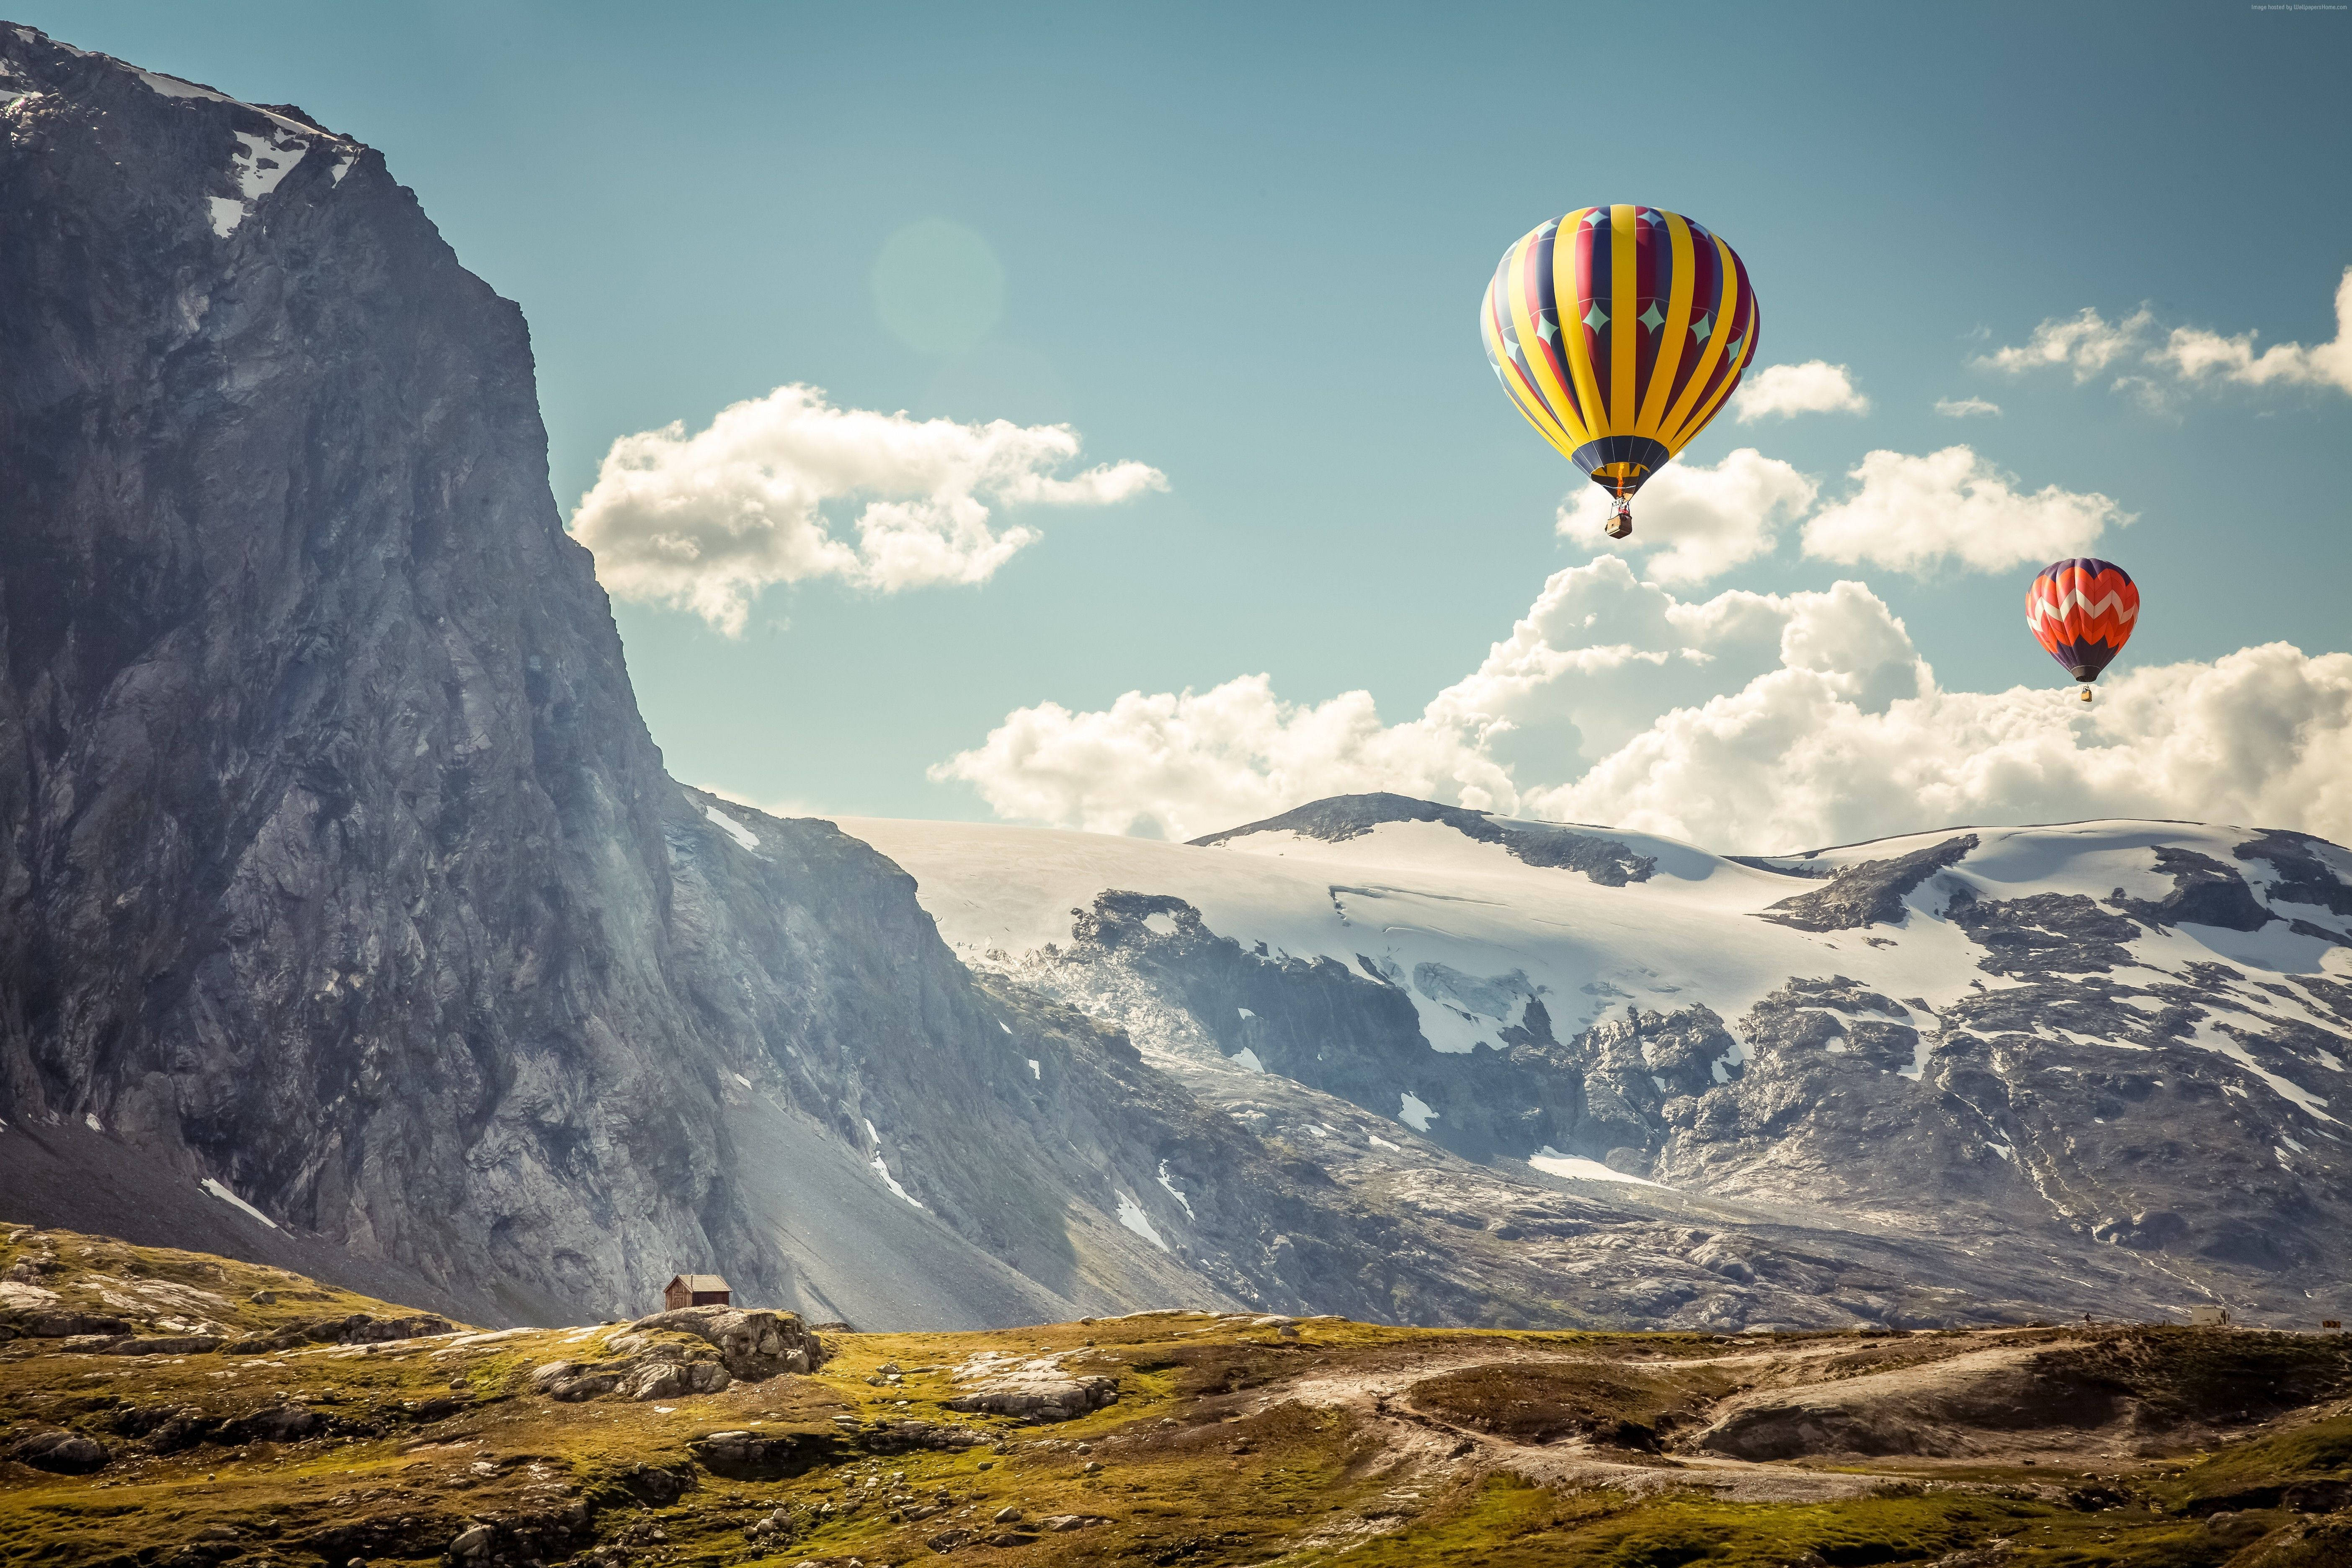 Enjoy The Beautiful Landscape Of The World From A Hot Air Balloon. Background